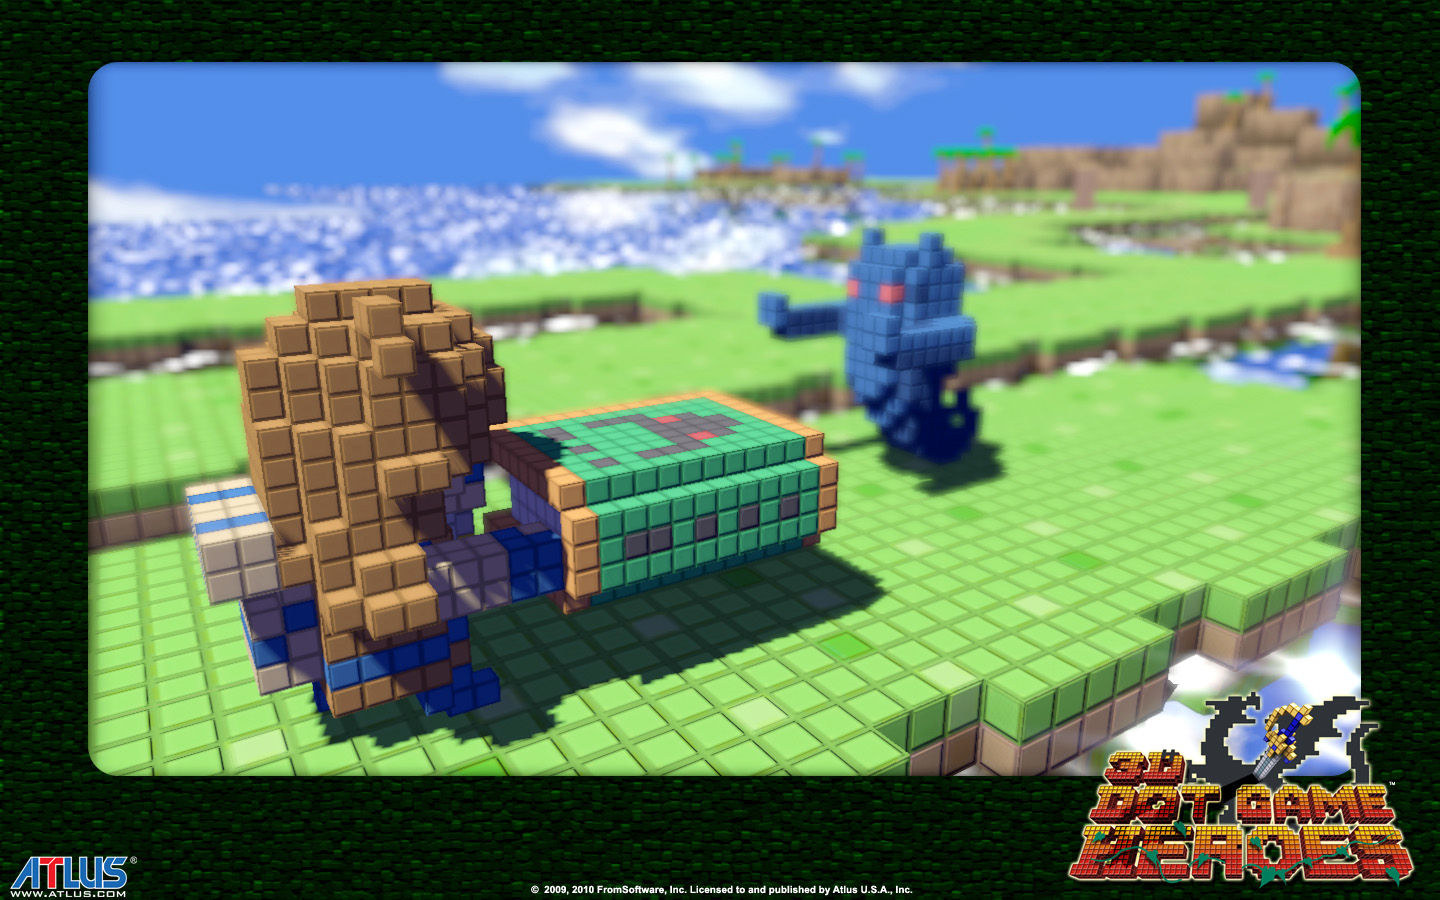 3d dot game heroes ps3